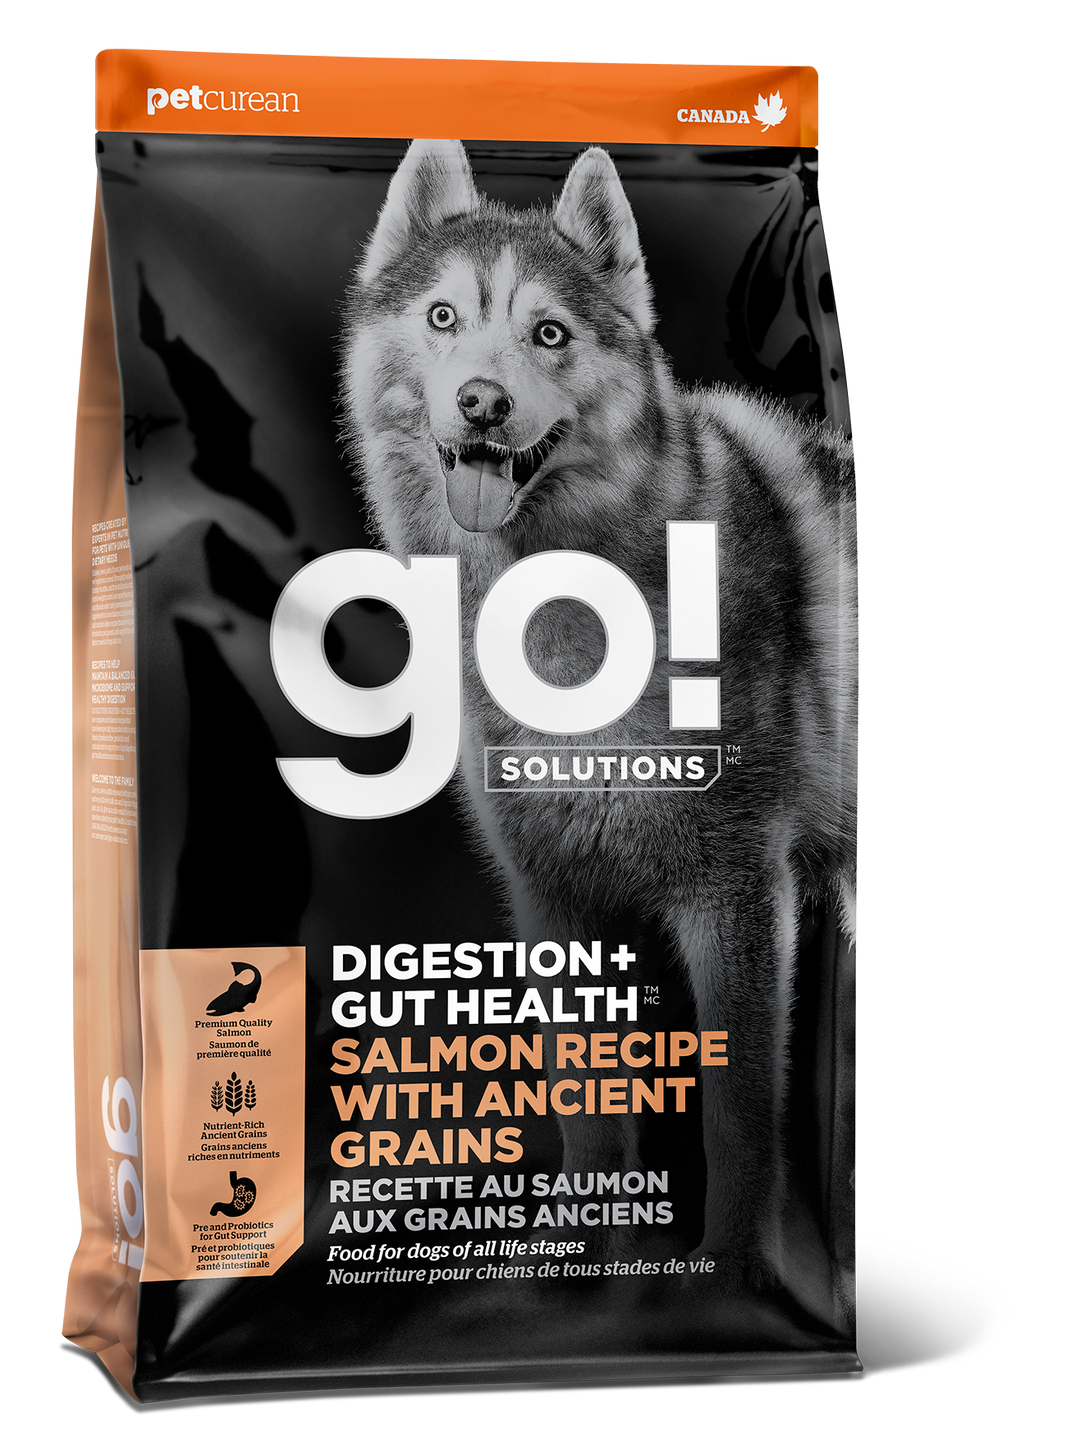 Go! Solutions Digestion + Gut Health Salmon Recipe With Ancient Grains Dog Food